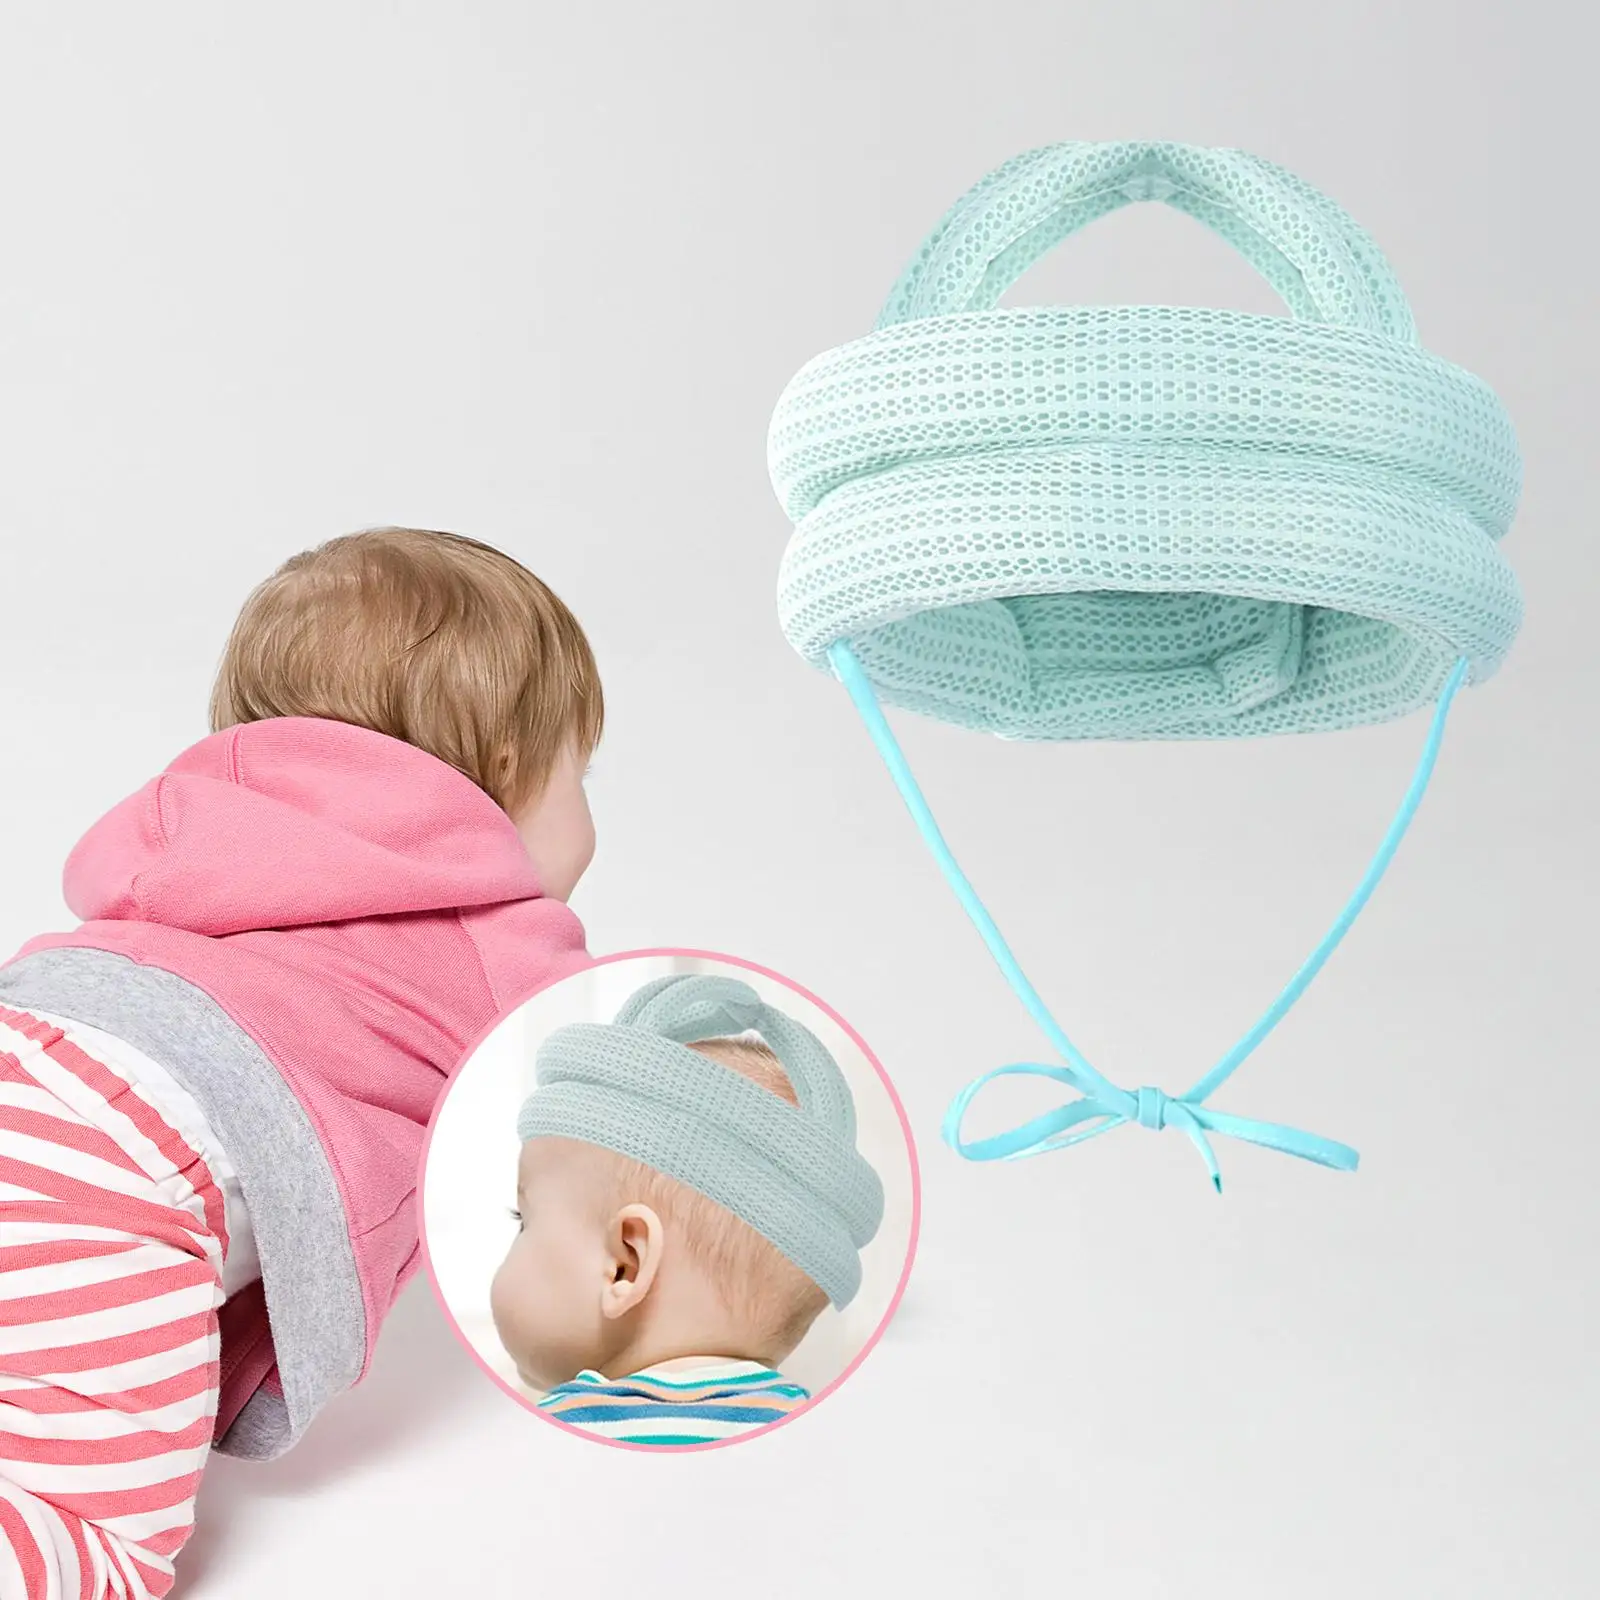 Kids Soft Head Cushion Protective Harnesses Cap for Infant Boys Girls Running